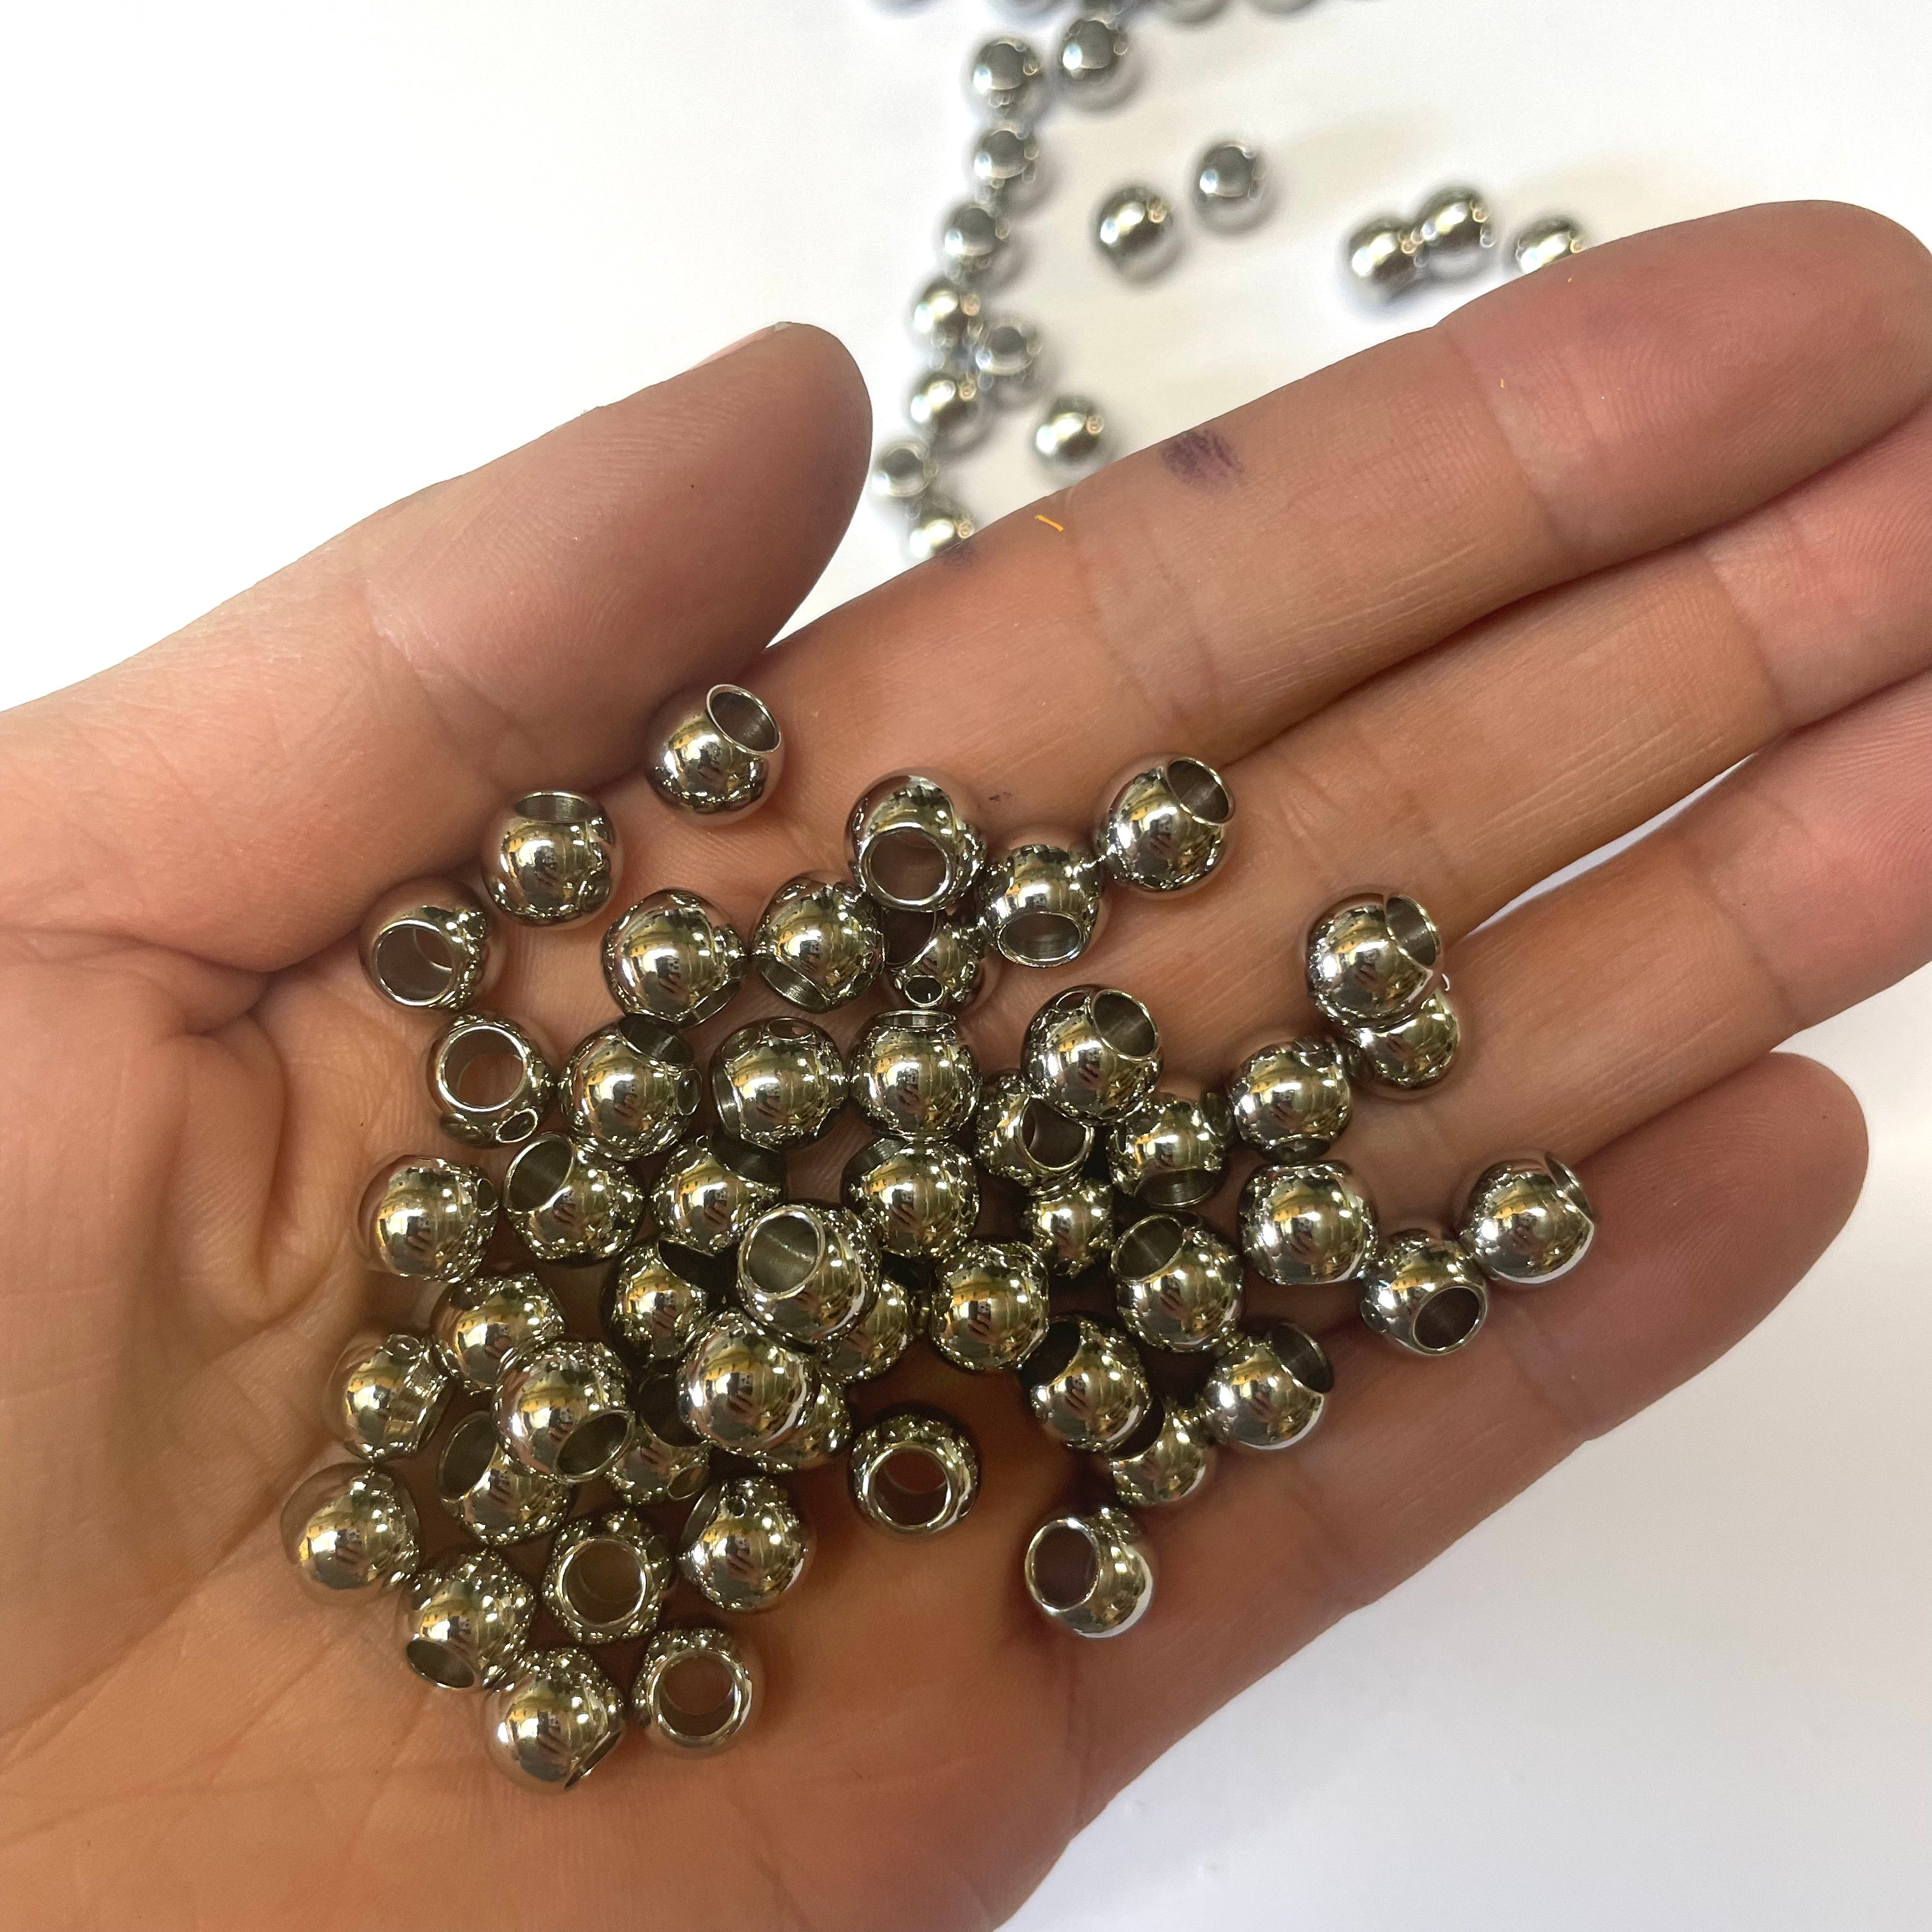 Stainless Steel Beads 8mm x 10 pcs - Crome